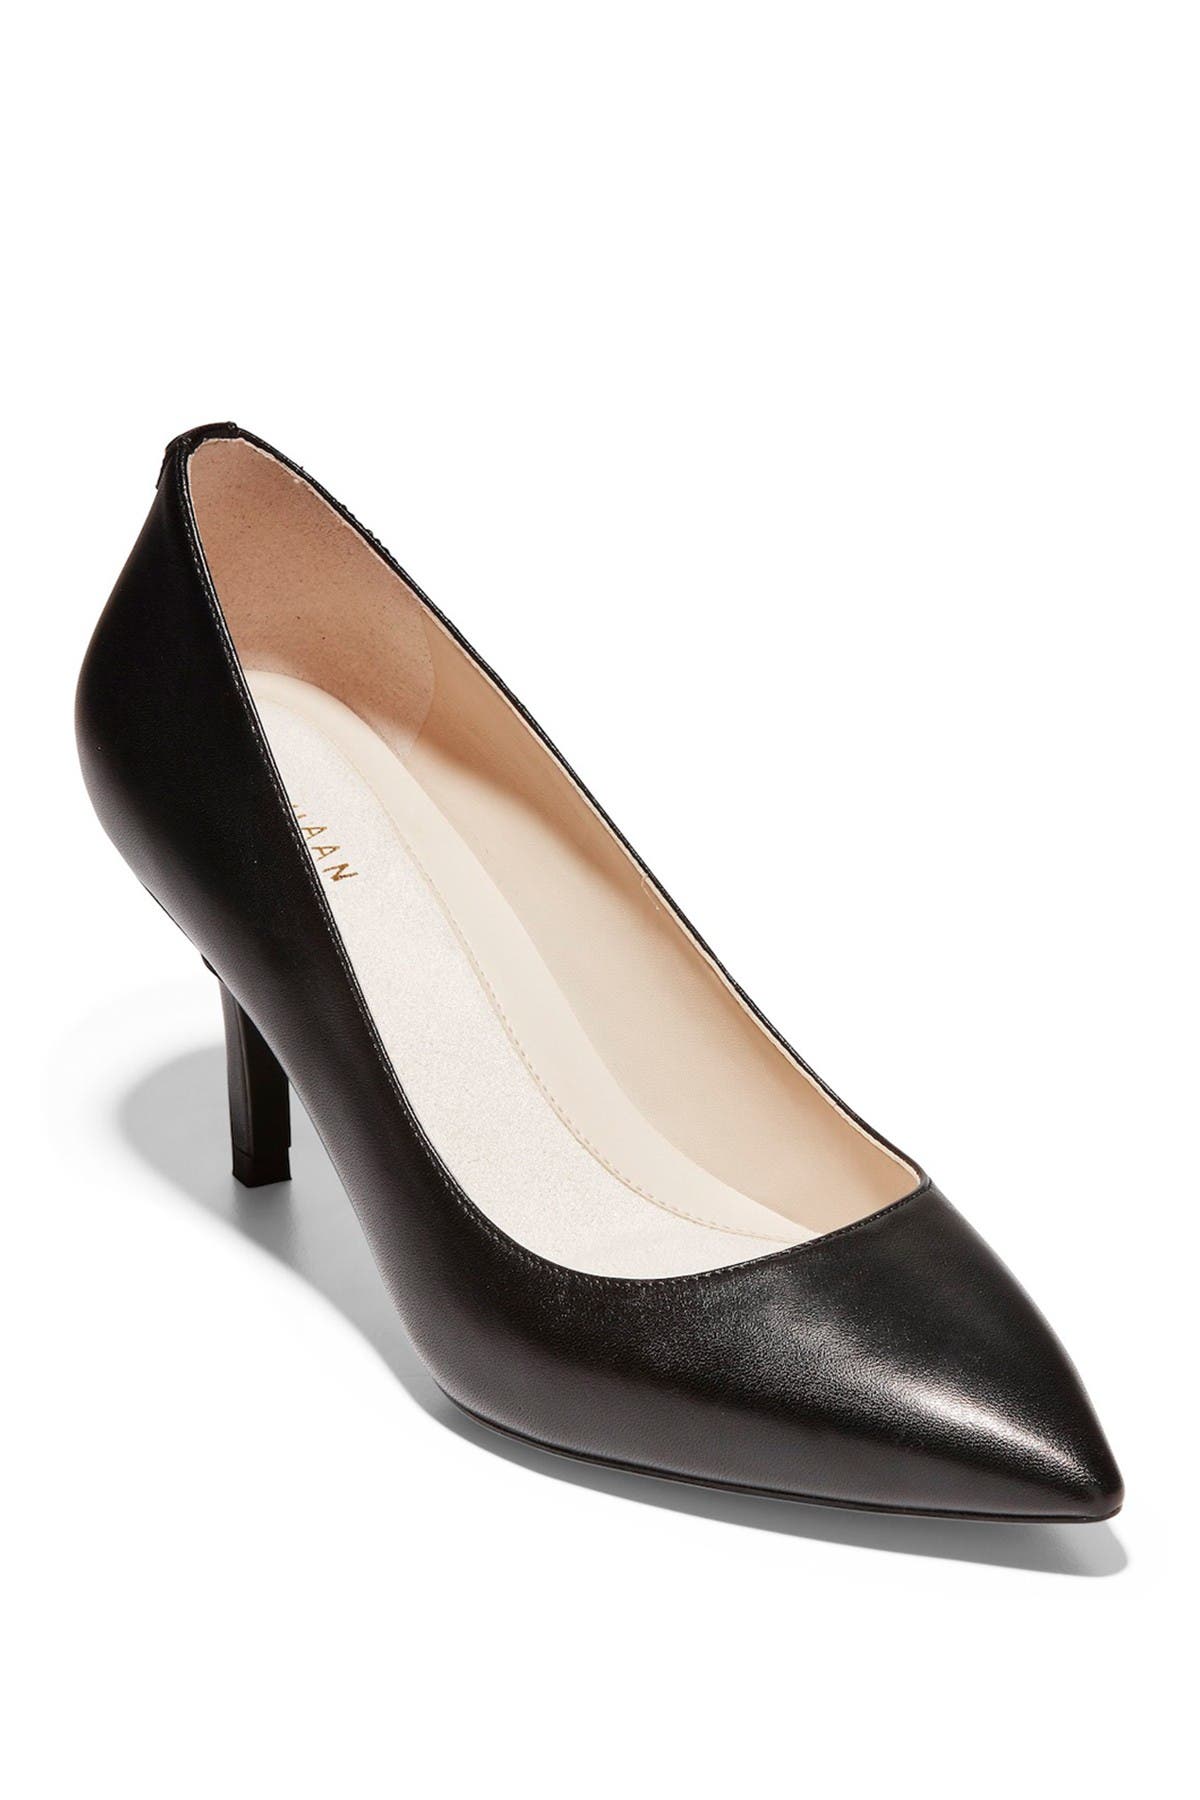 Cole Haan | The Go-To Stiletto Pump 